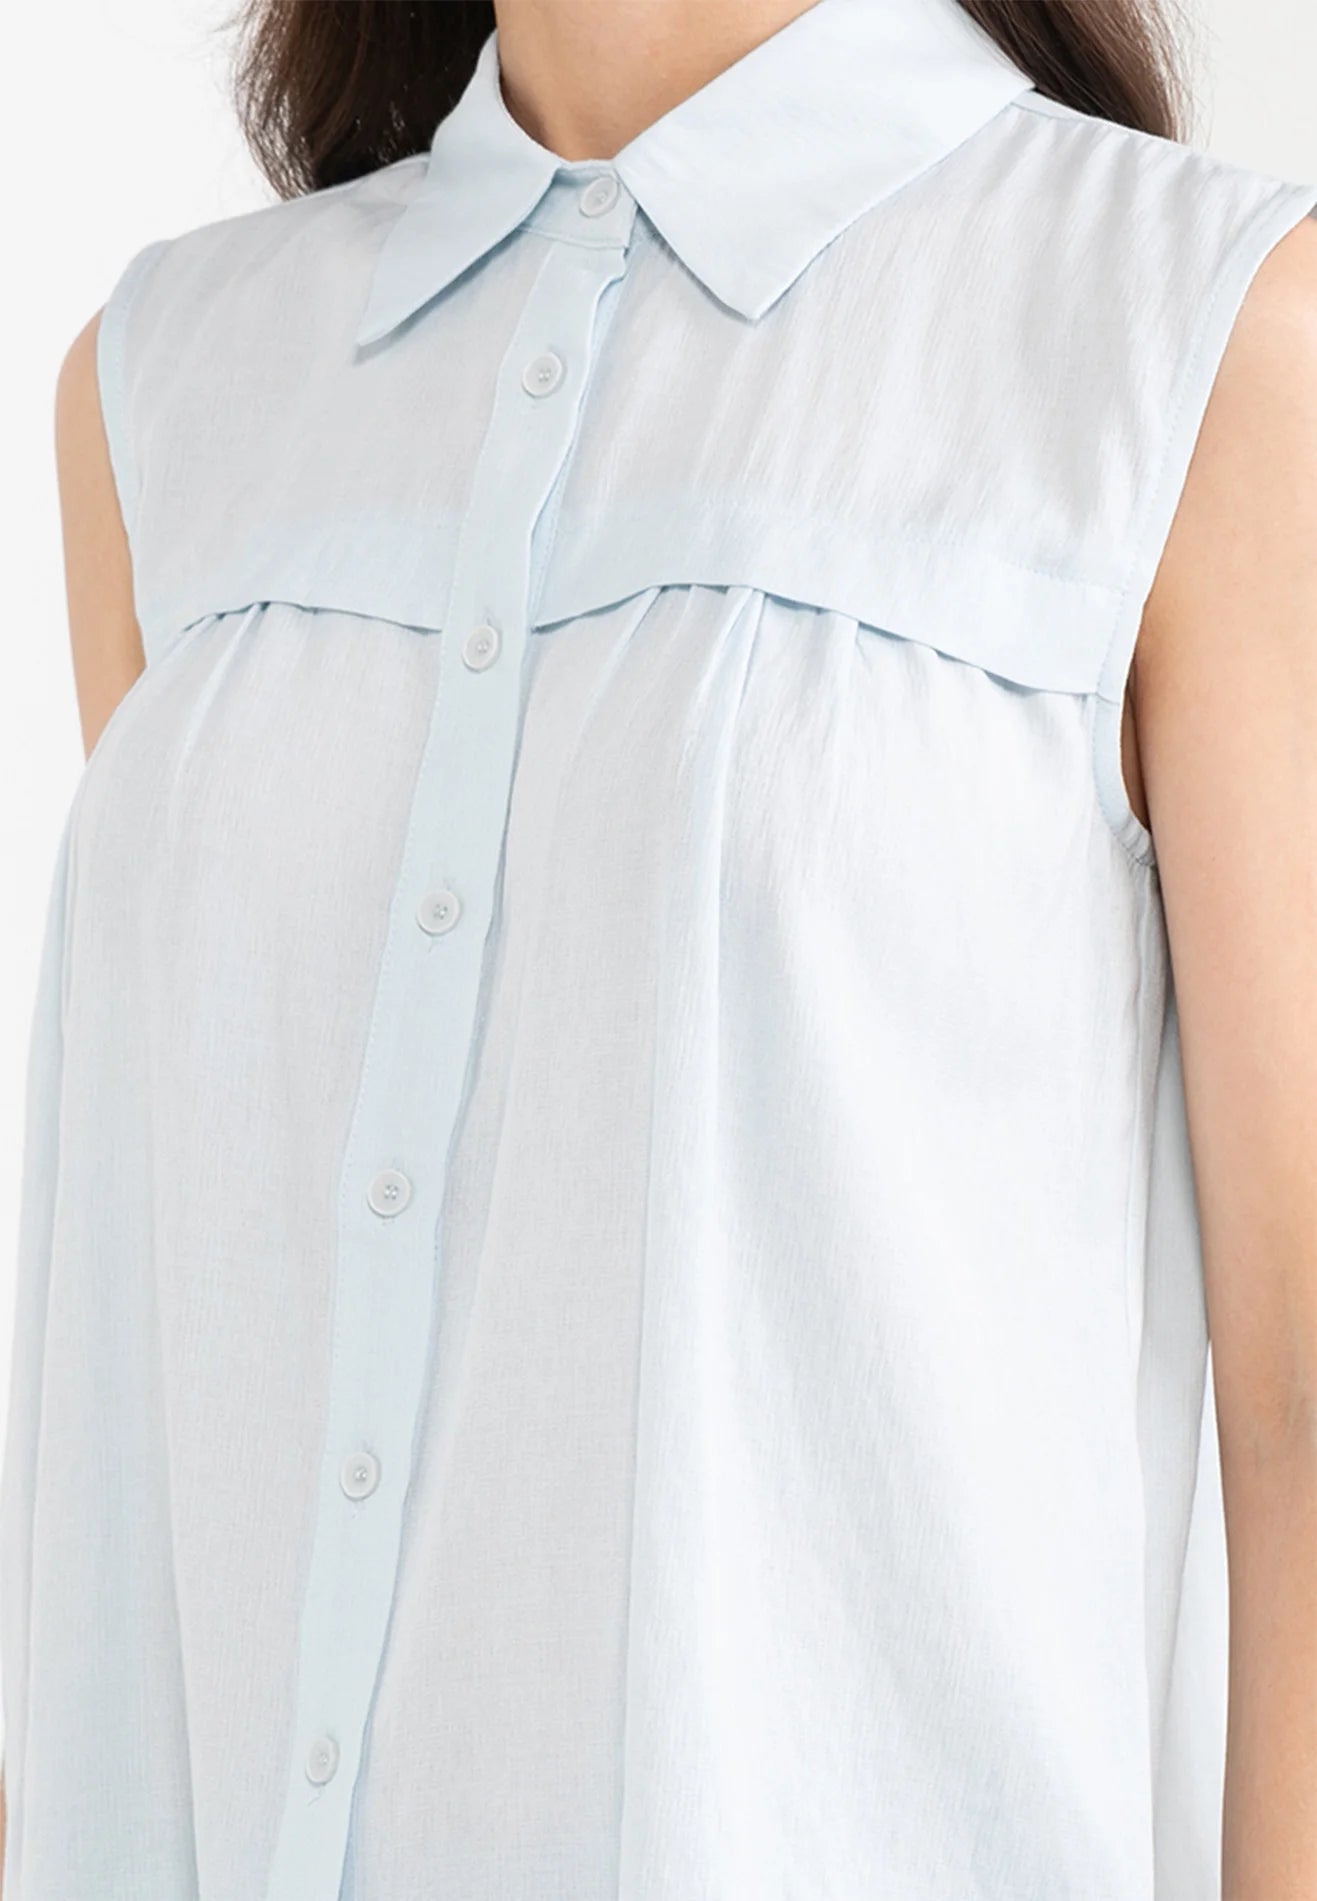 ELLE Apparel Classic Soft Sleeveless Button Up Top